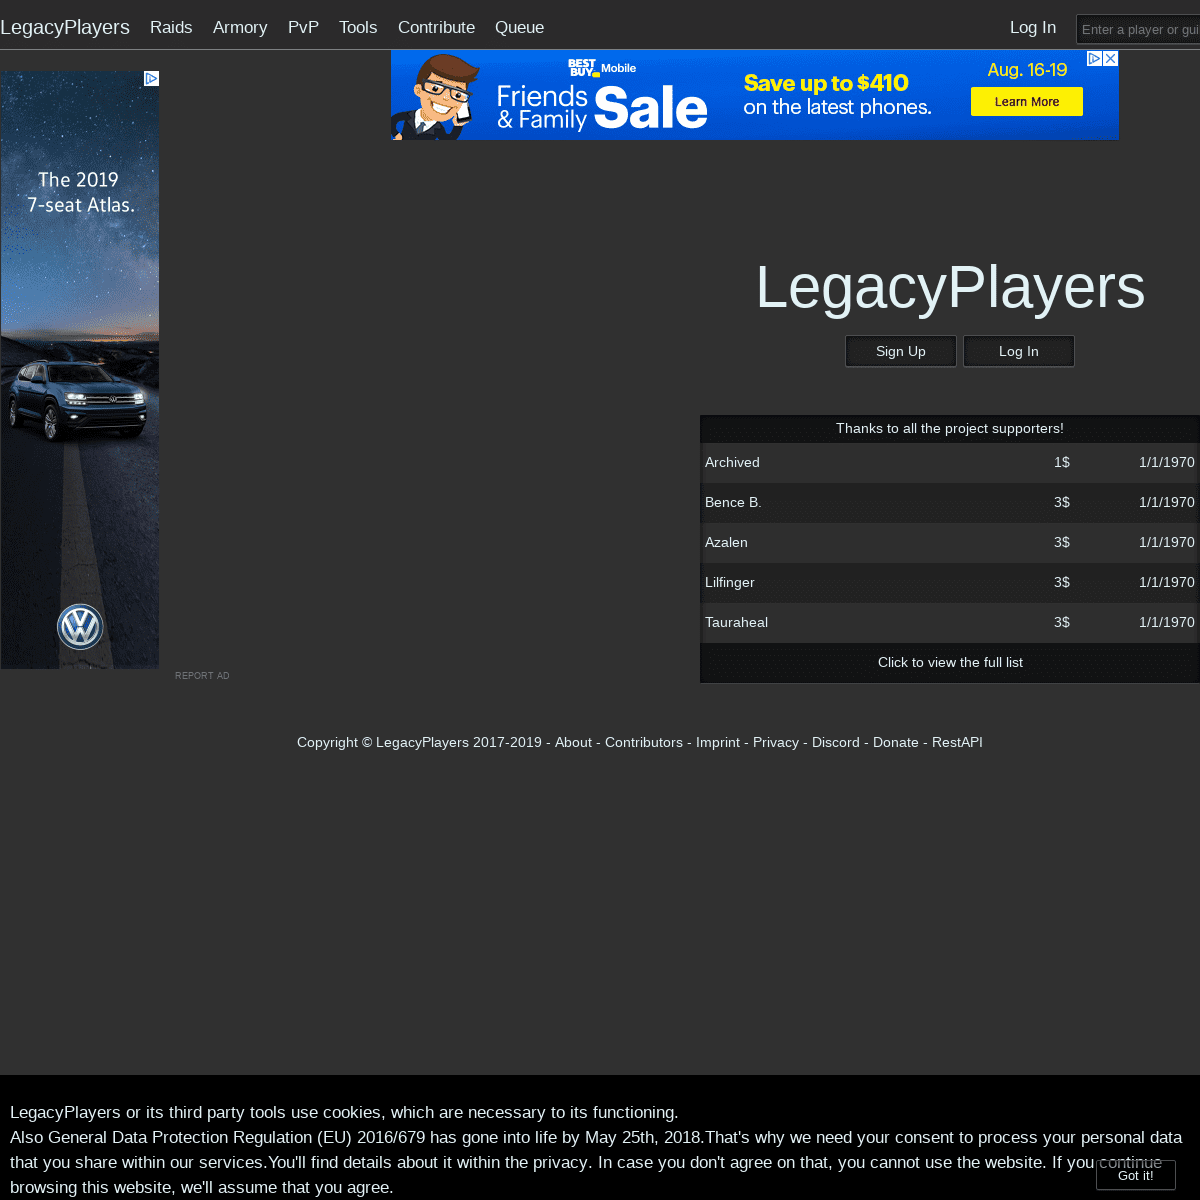 A complete backup of legacyplayers.com